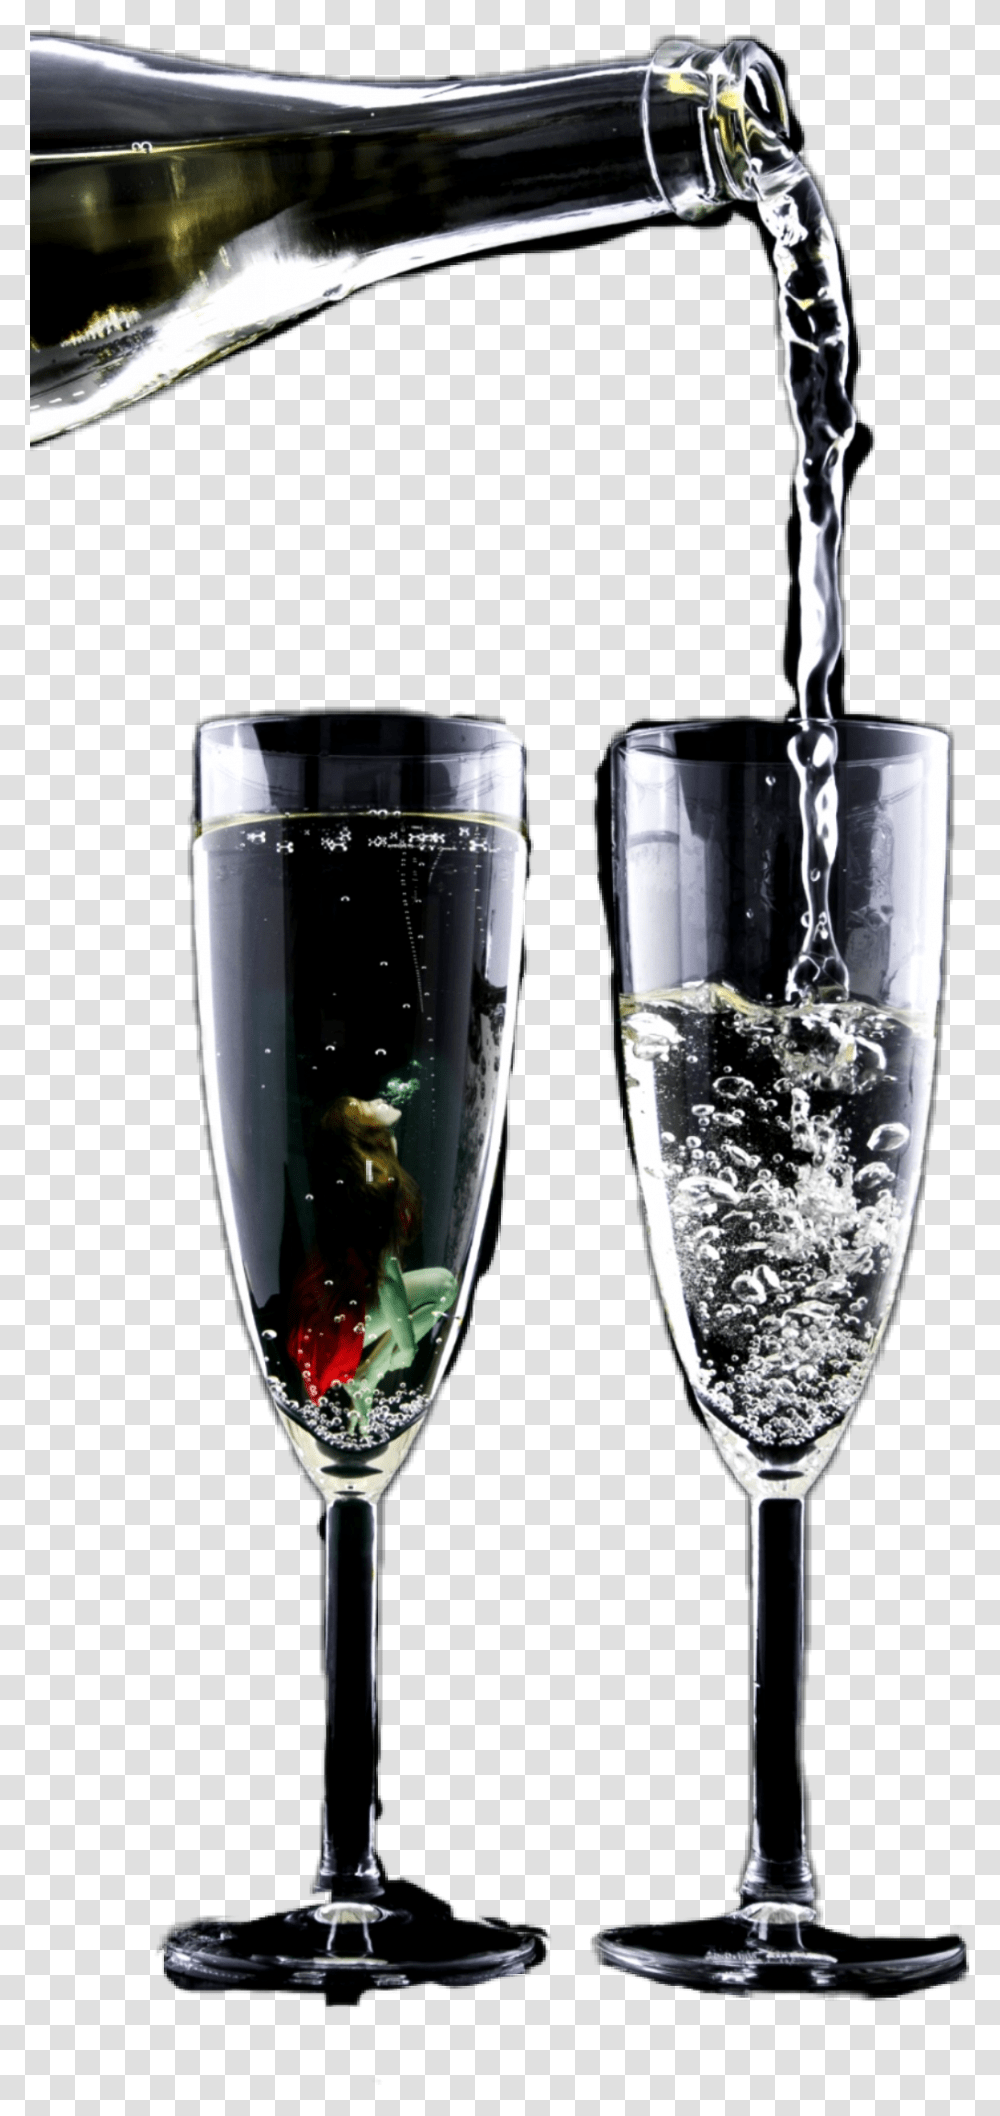 Water Pouring Bottle Hwineglass Bubbles Champagne Stemware, Goblet, Wine Glass, Alcohol, Beverage Transparent Png